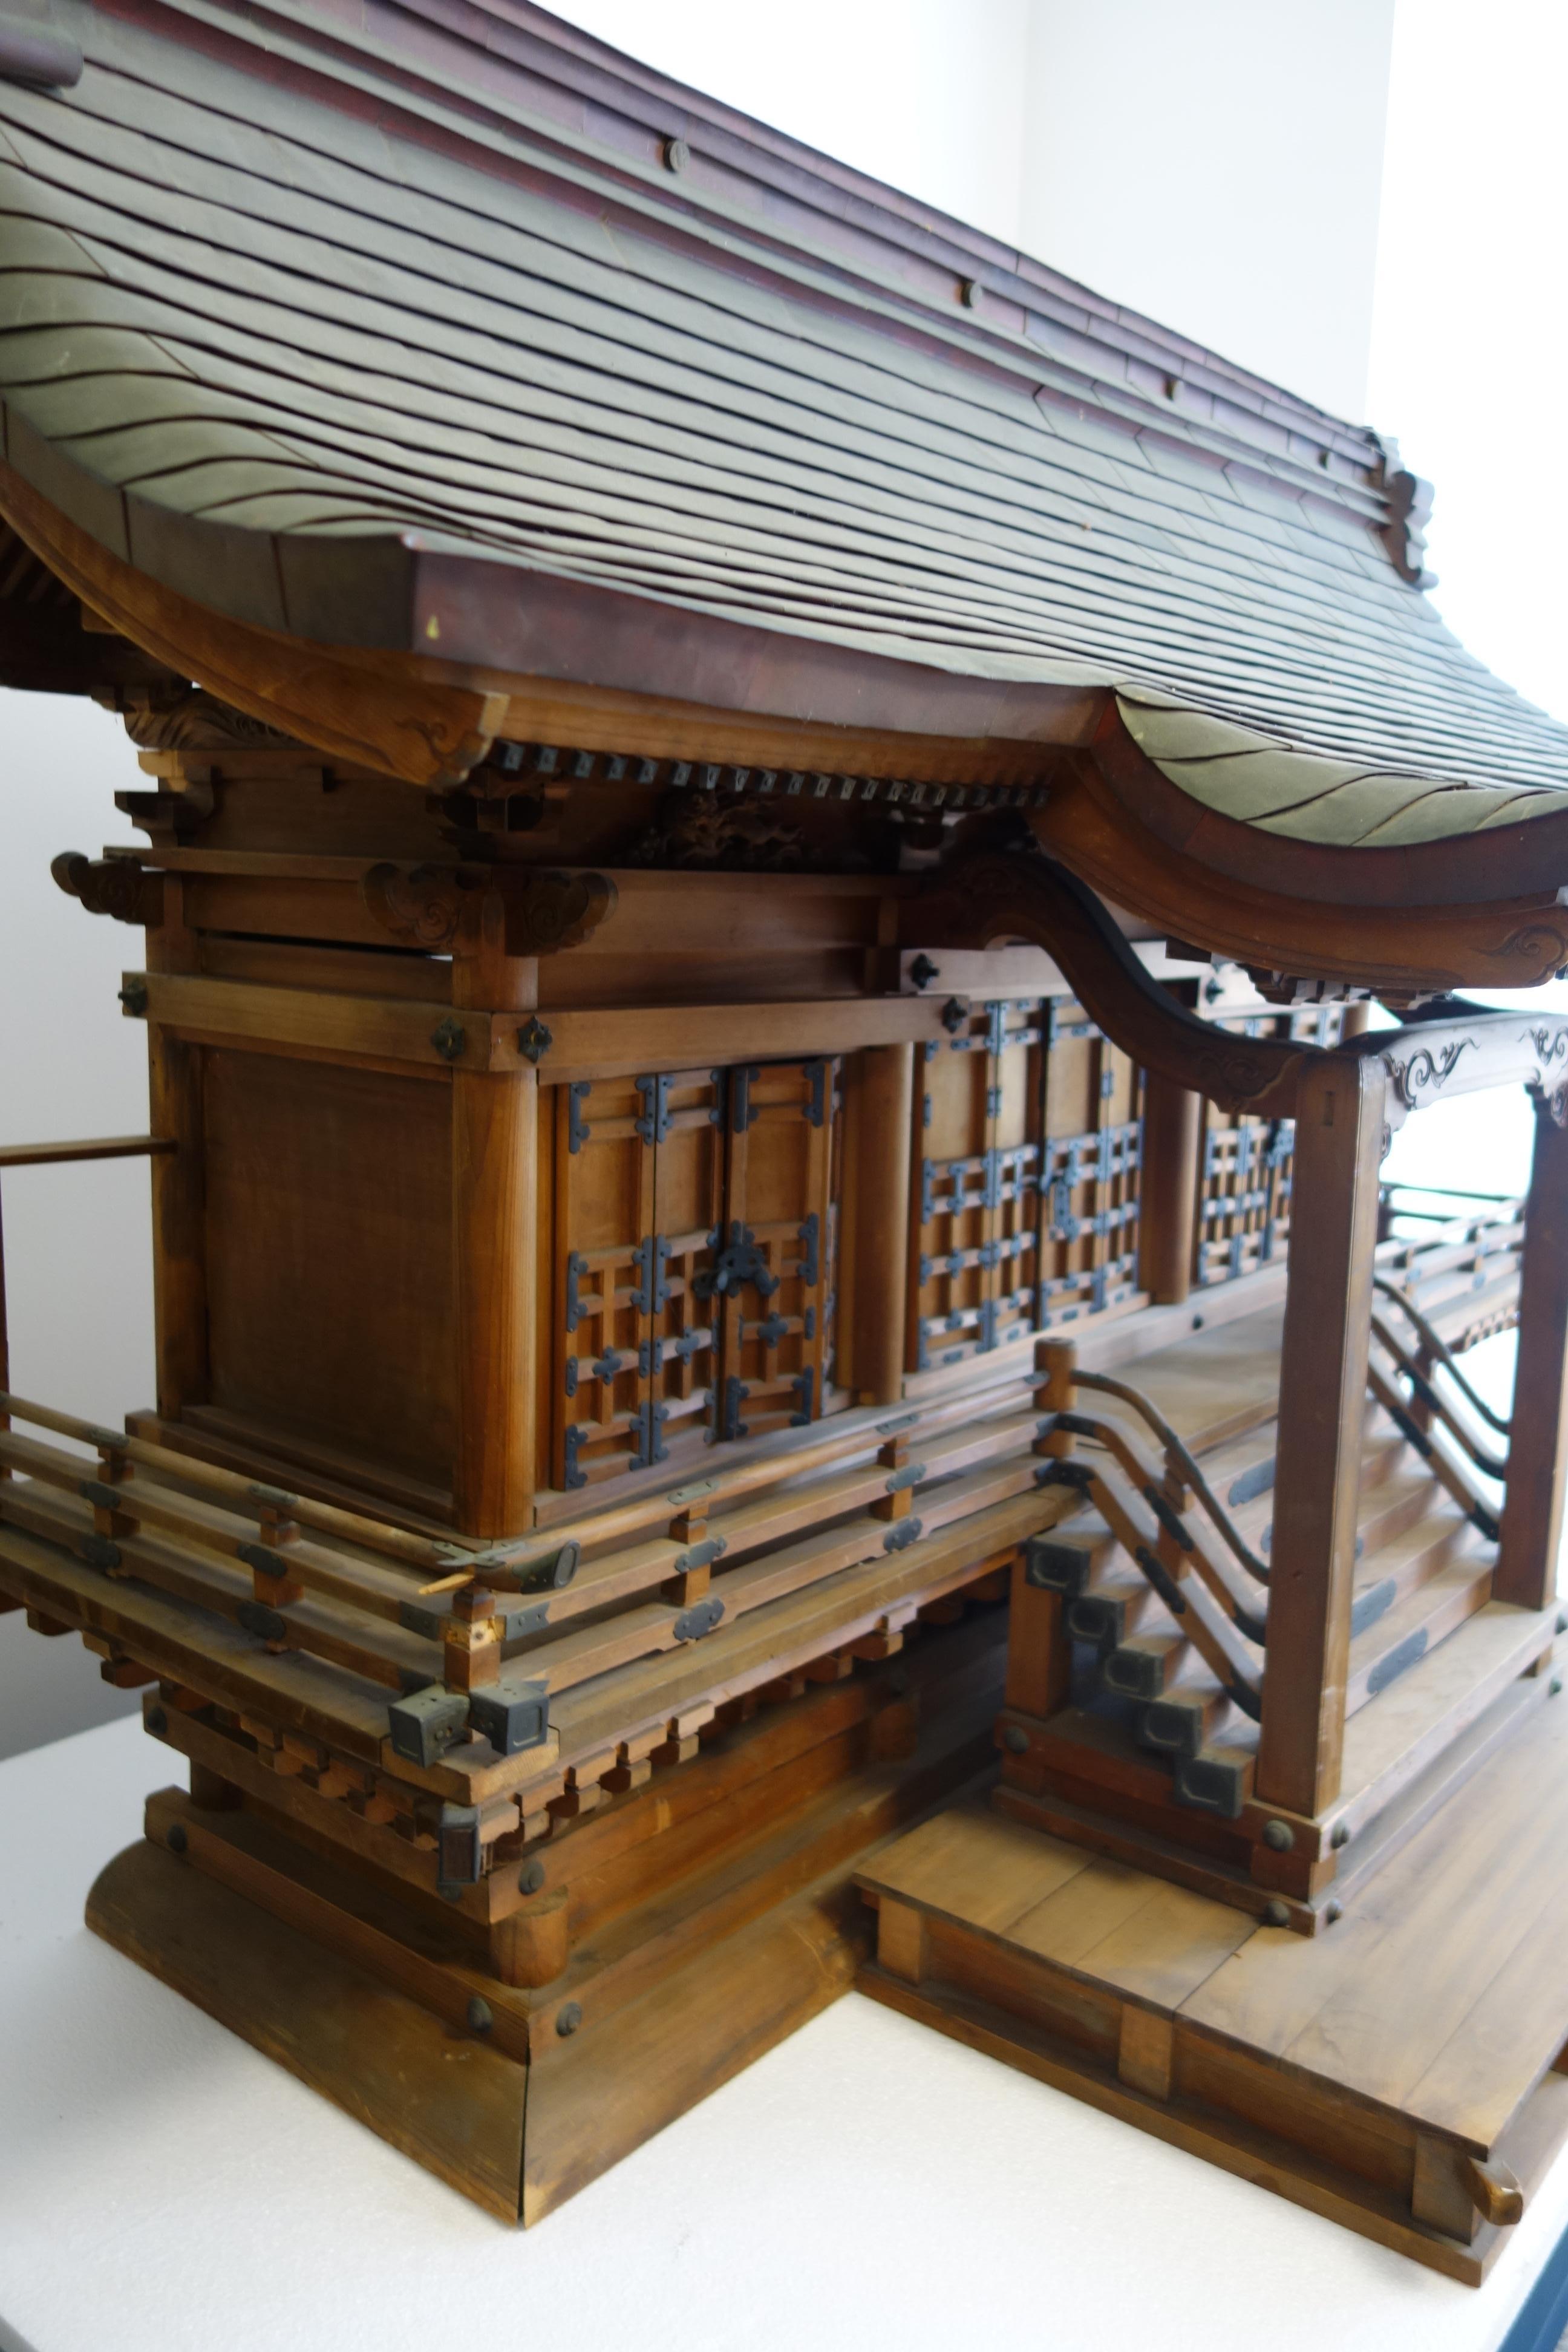 This beautiful Shinto Shrine is called ´Yamako´ and represents a Japanese antique house altar. It is very elaborately carved by hand and decorated with metal fittings. The roof is covered with copper plates and decorated with beautiful Japanese